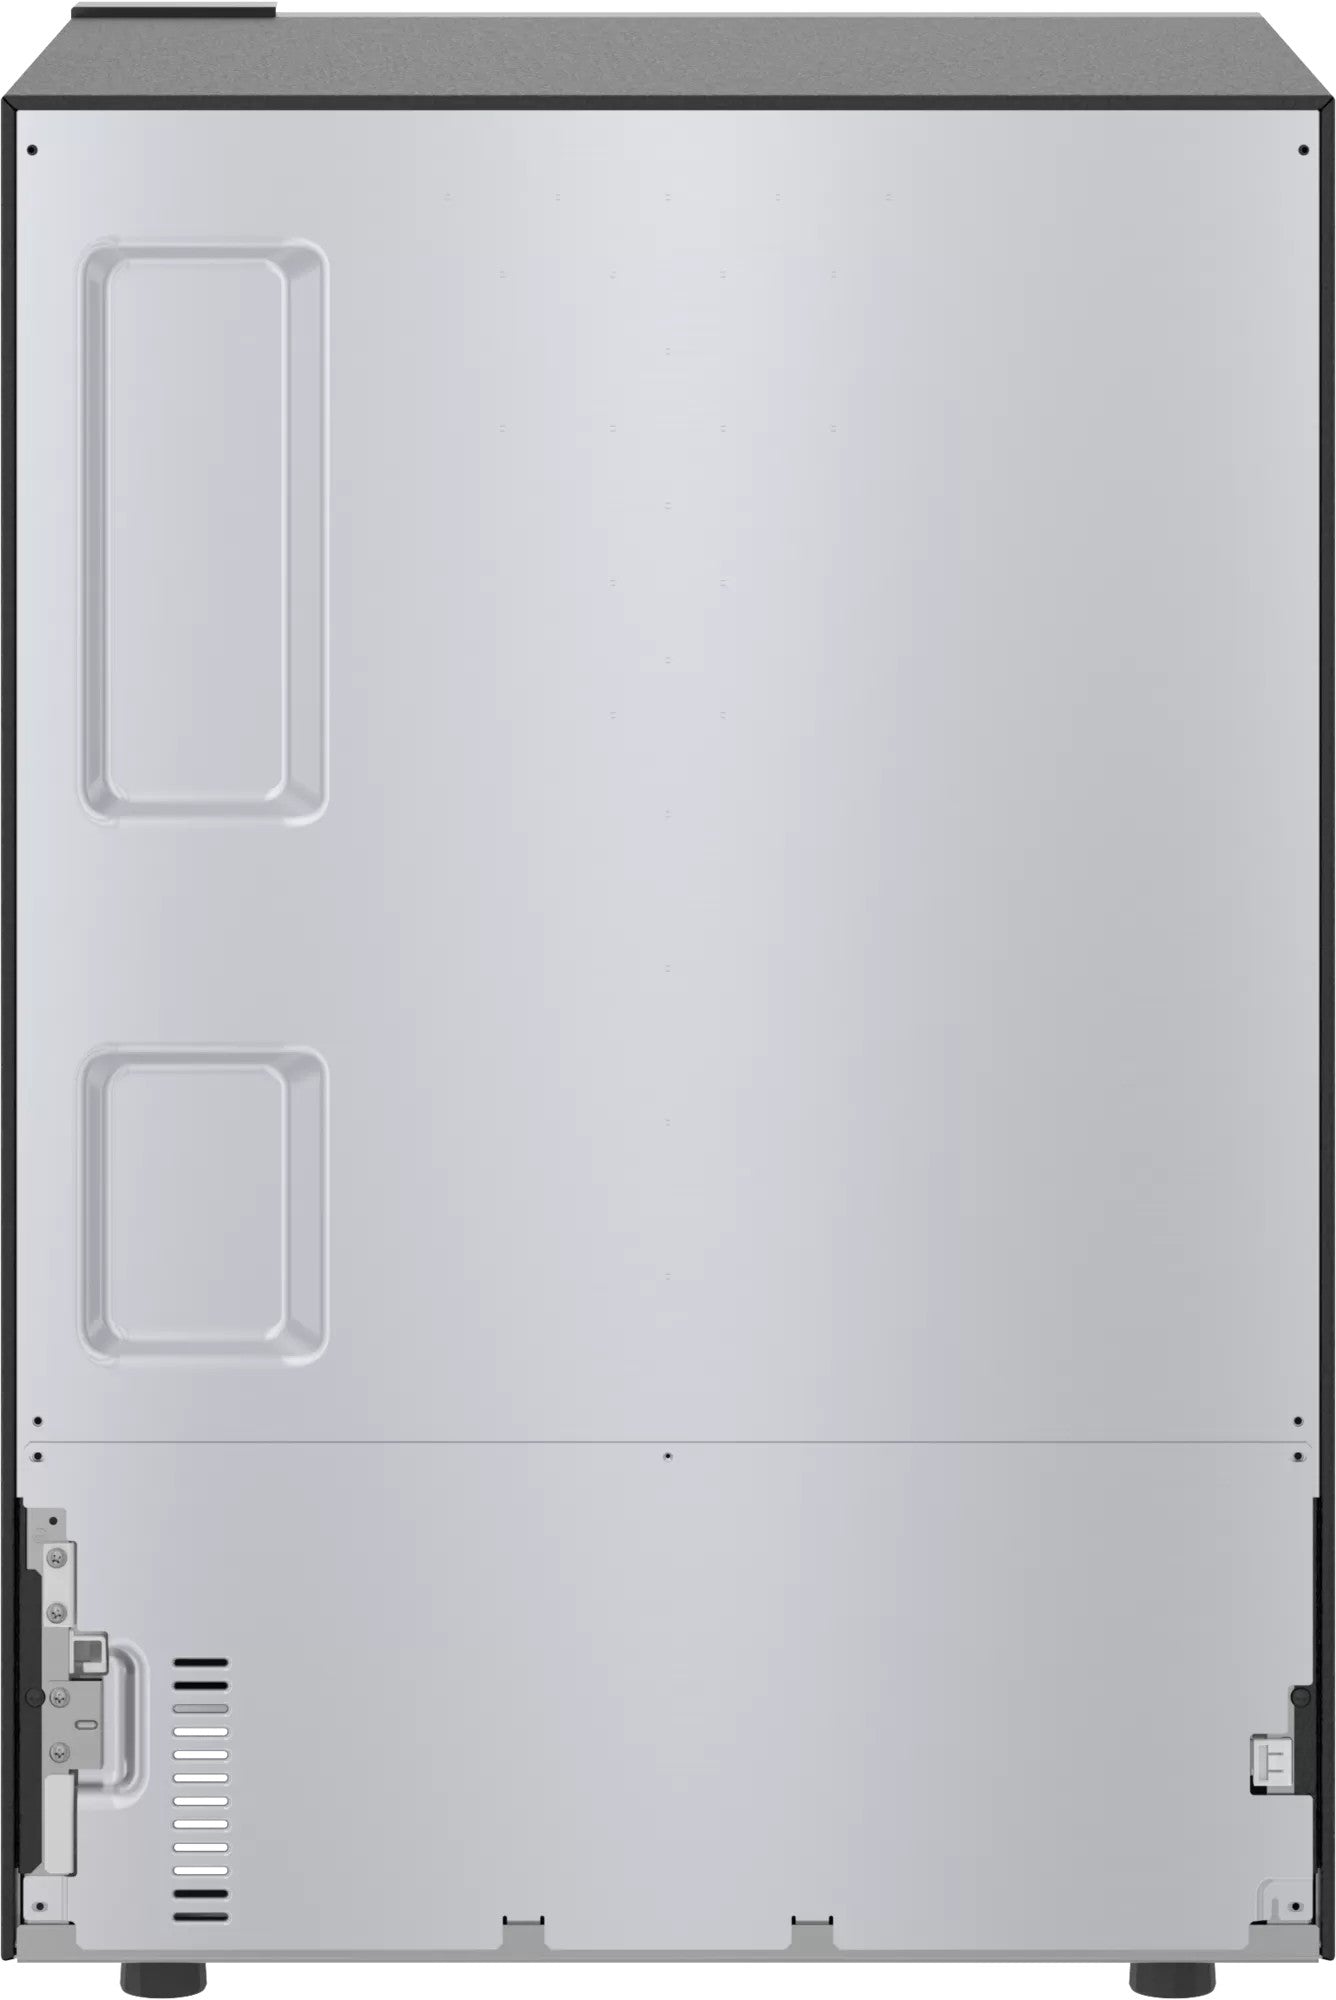 Thermador - 23.9 Inch 5.2 cu. ft Built In / Integrated Refrigerator in Stainless - T24UR915RS